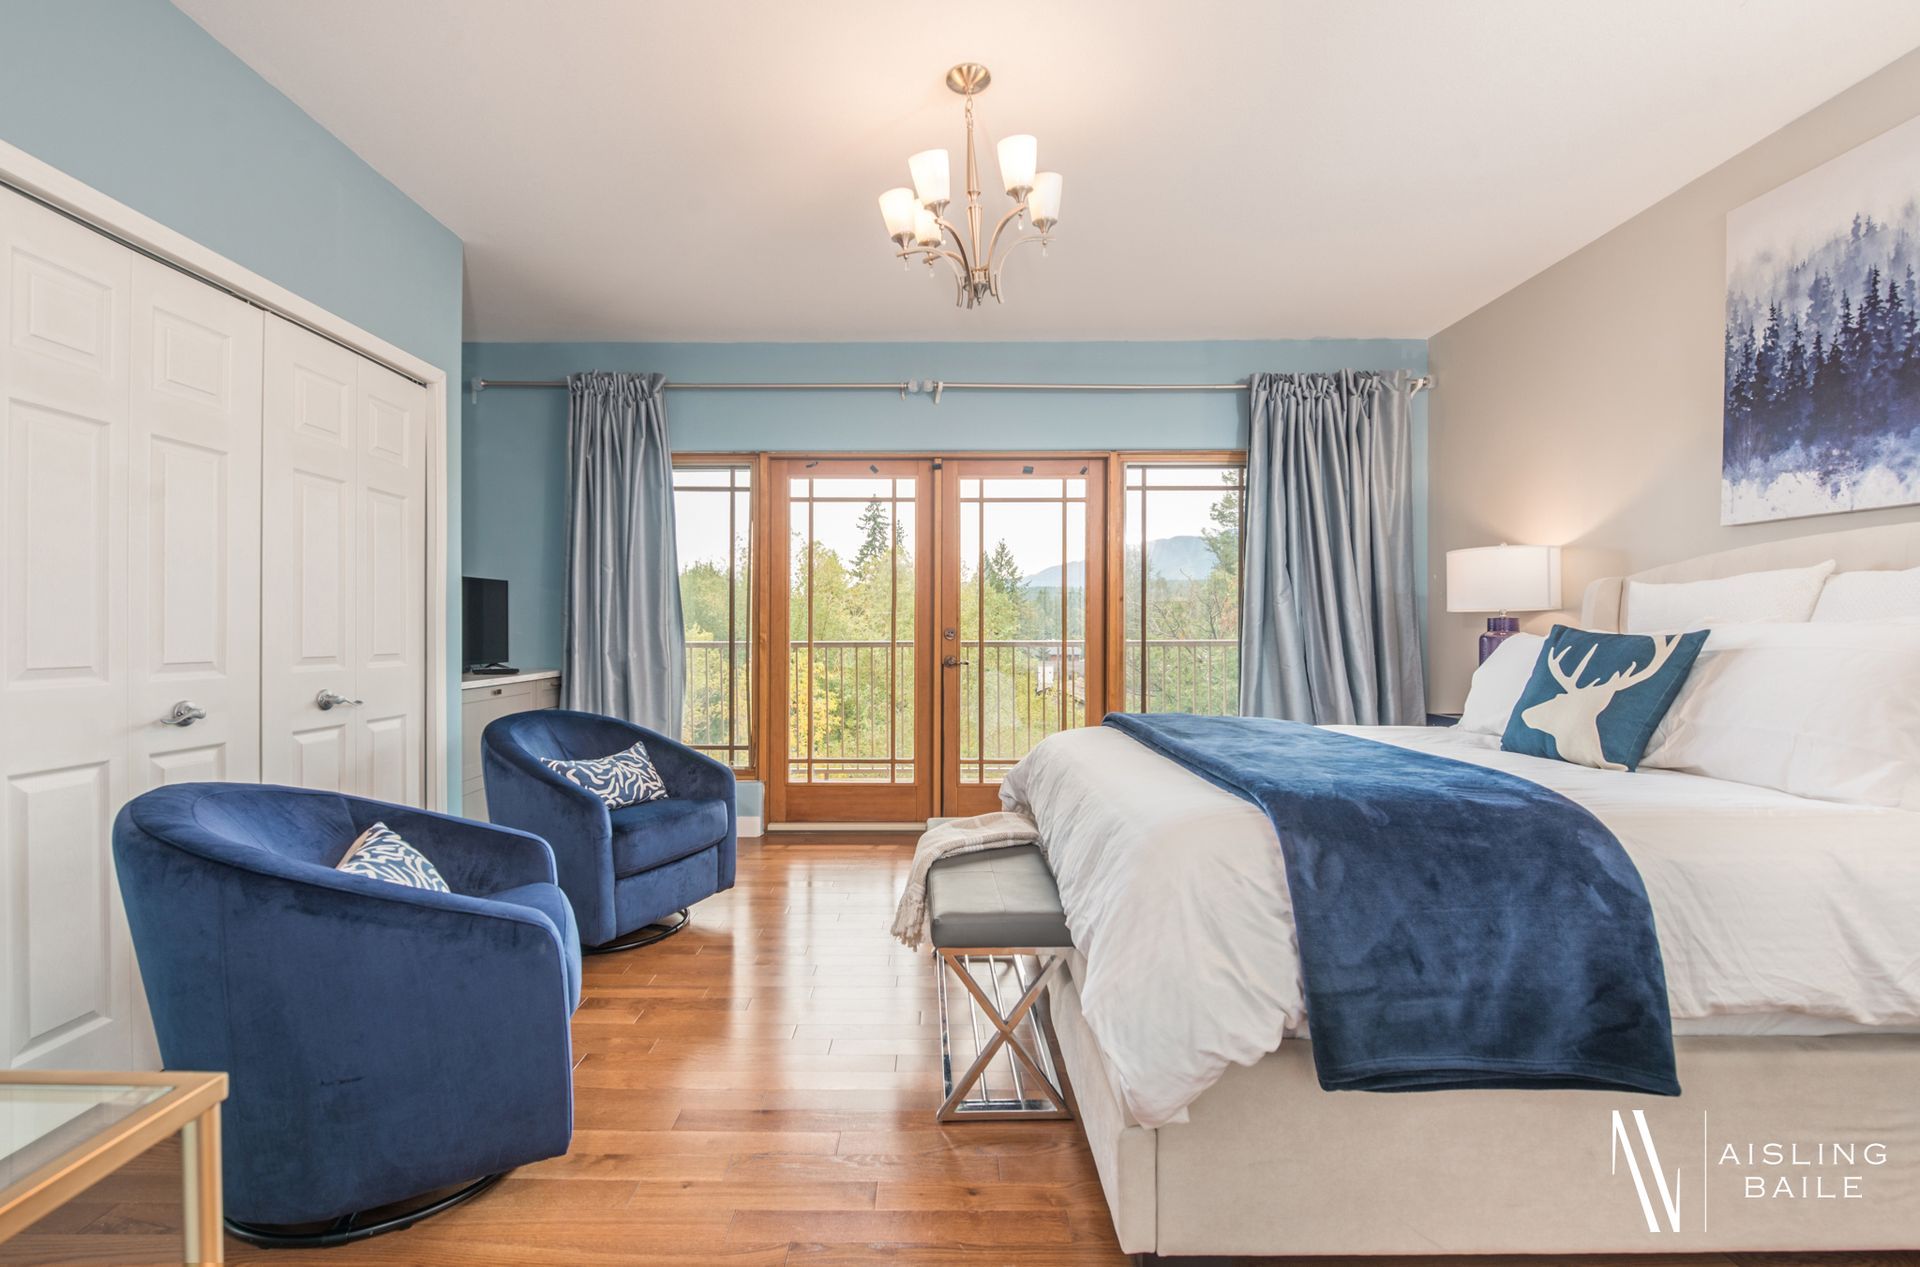 Primary bedroom of the Central Elegance, an Invermere BC Vacation Rental hosted by Aisling Baile Property Management.